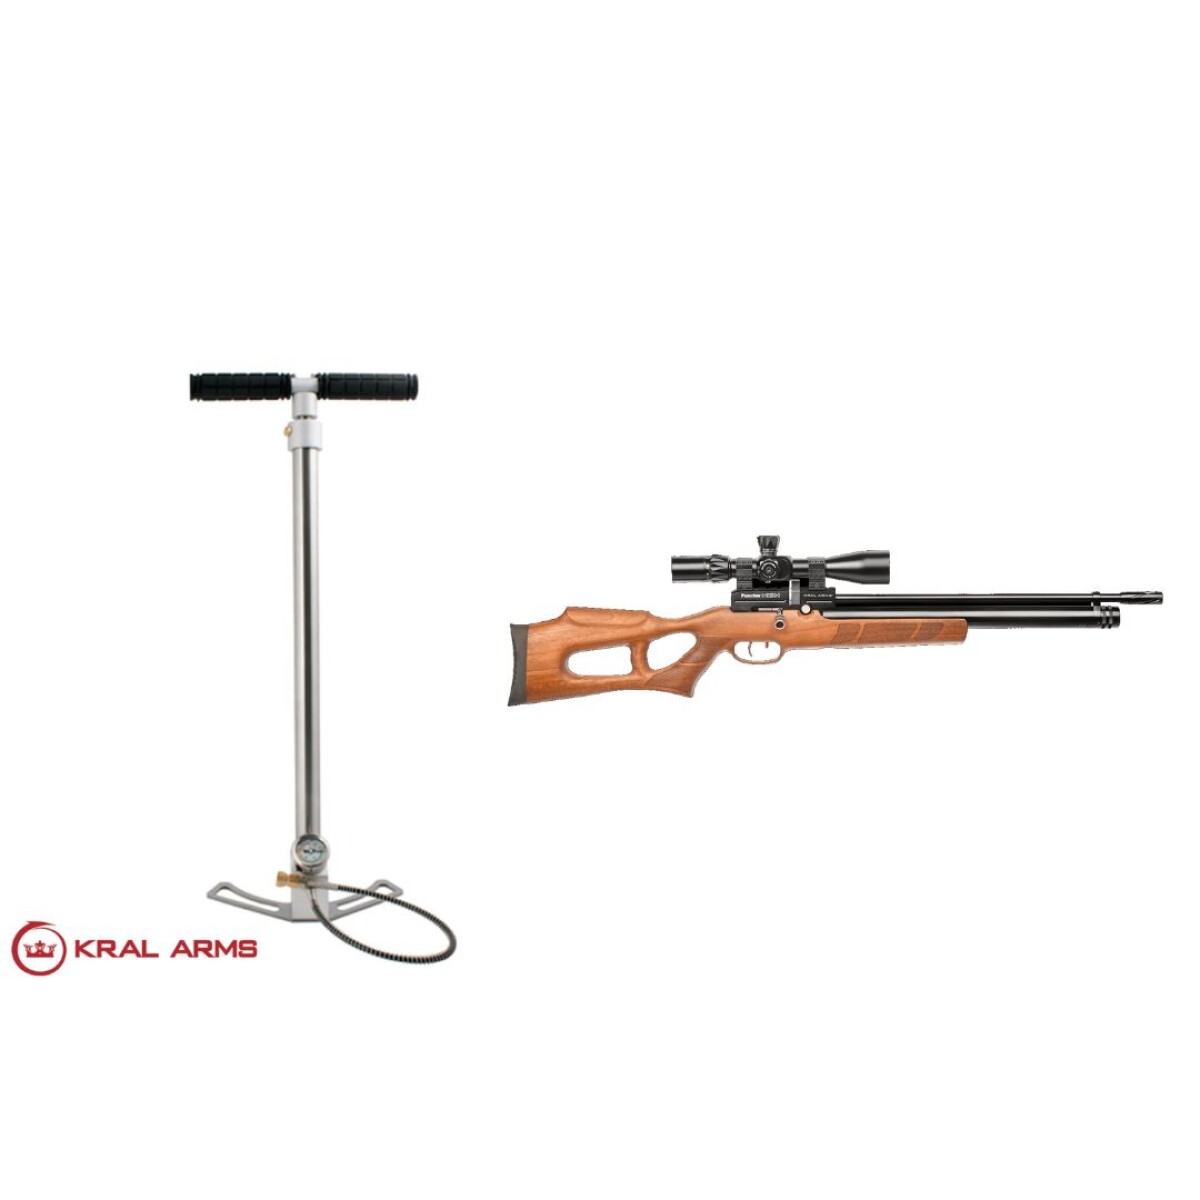 Rifle Chumbera PCP Puncher Nish W Cal 5,5mm + Inflador de mano - Kral Arms 